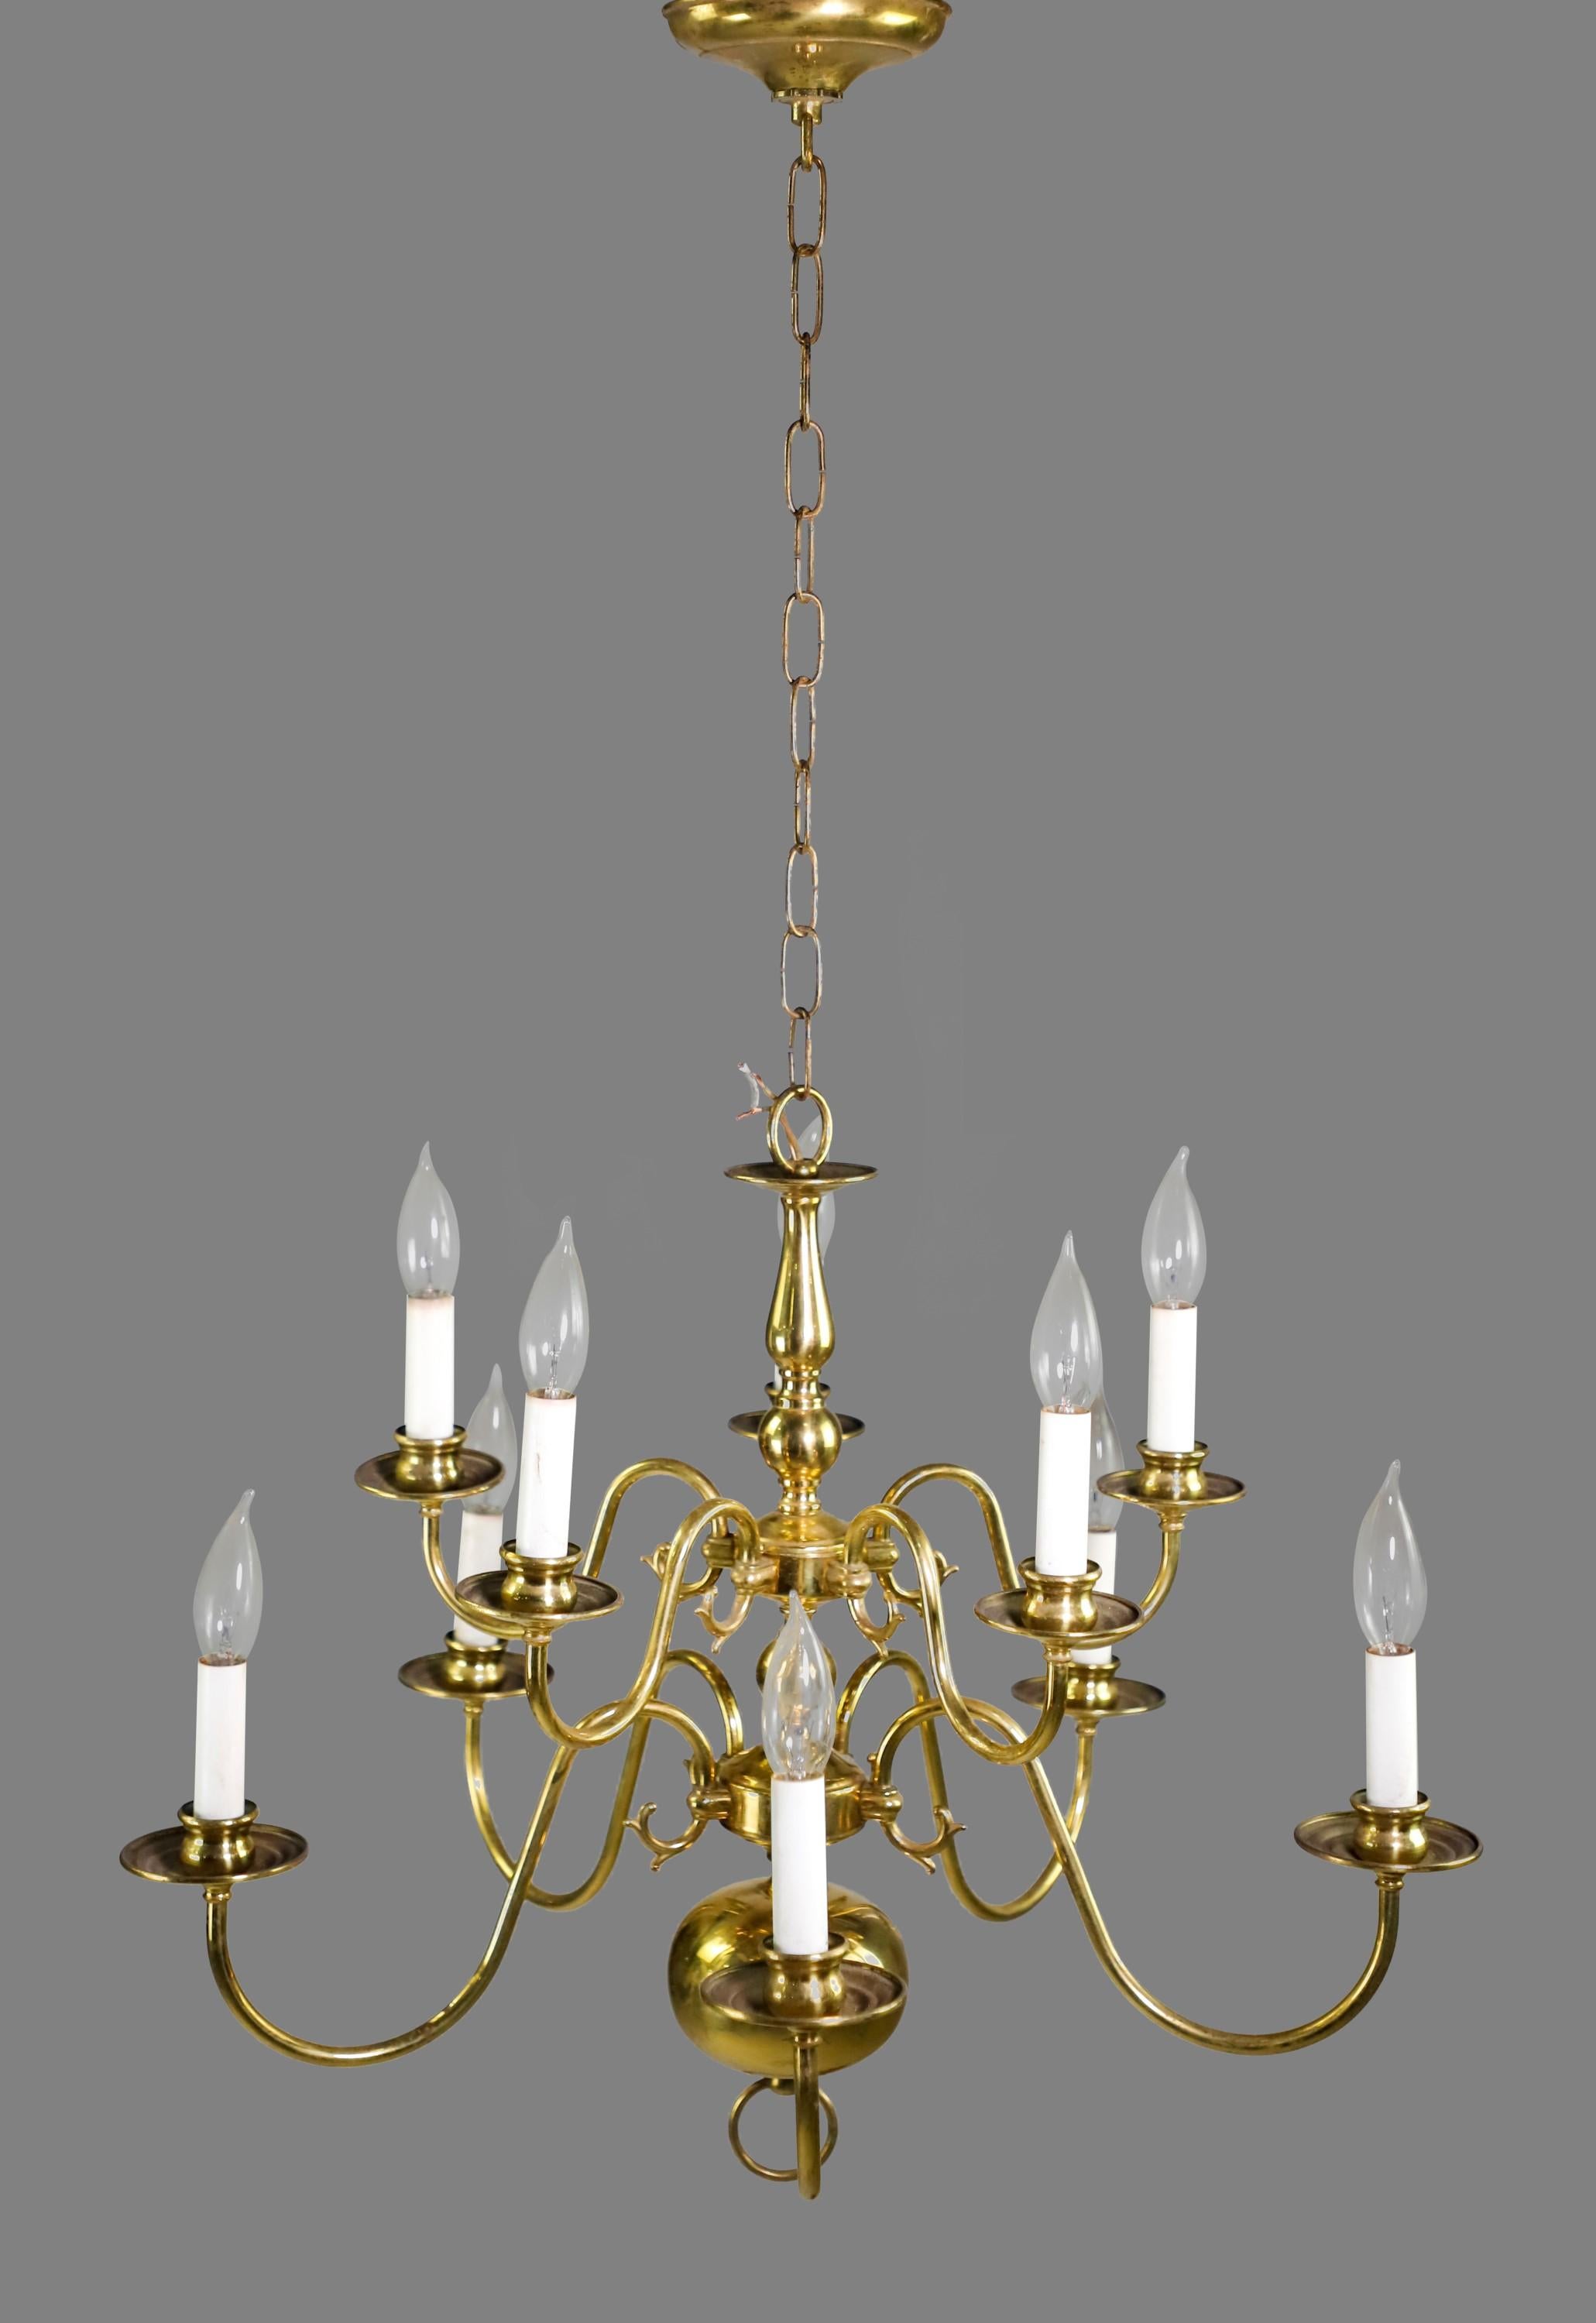 20th century Polished brass chandelier done in a Williamsburg style. Two layers of lights. Five lights each for a total of ten lights. Takes normal household Candelabra style lightbulbs. Cleaned and restored. Please note, this item is located in our